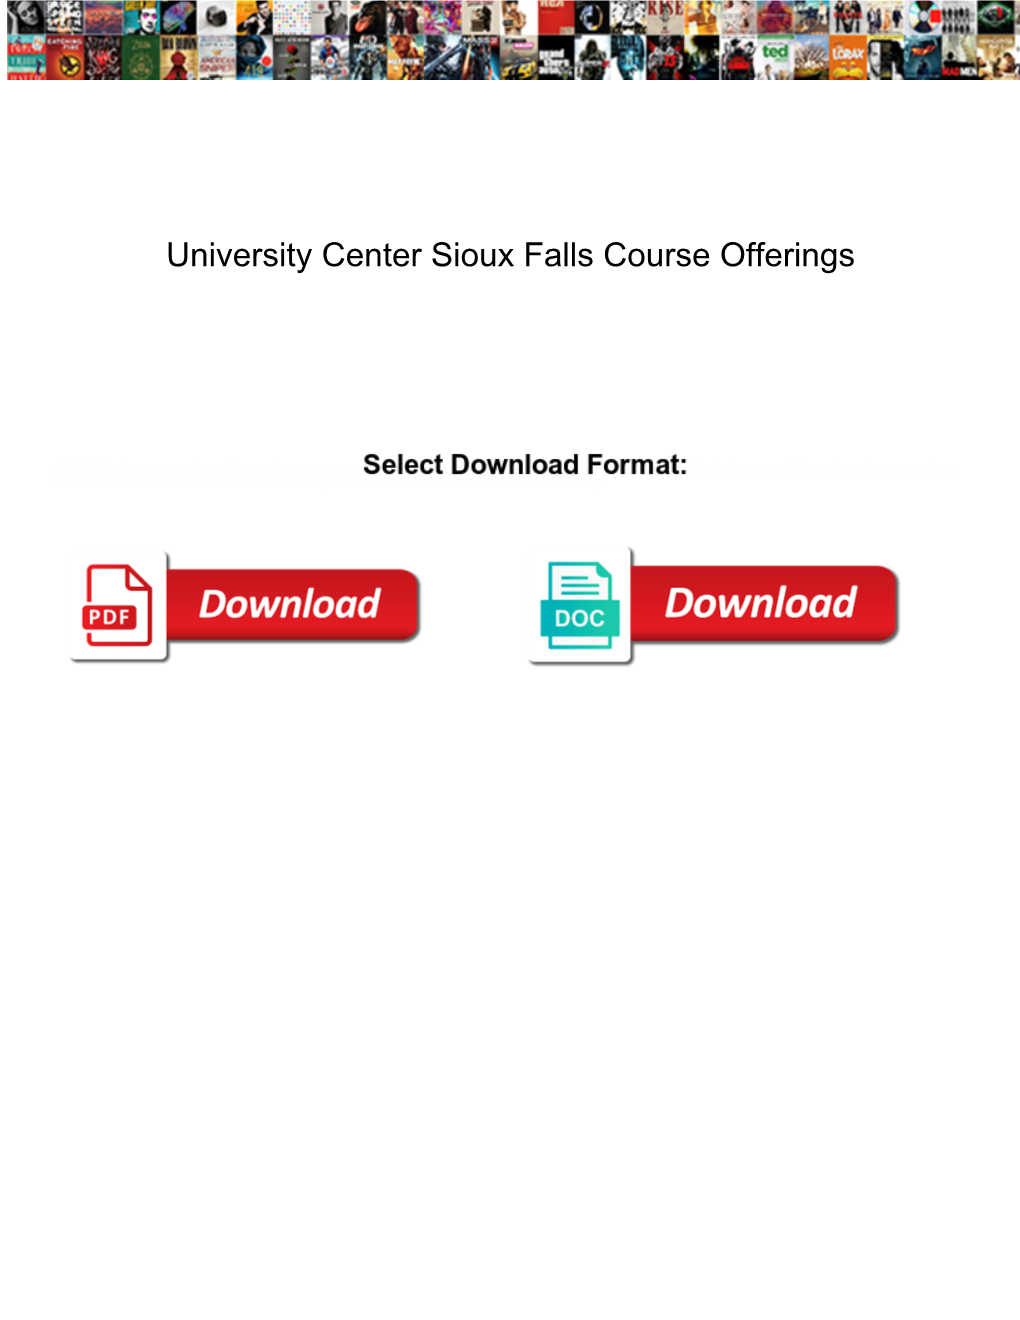 University Center Sioux Falls Course Offerings